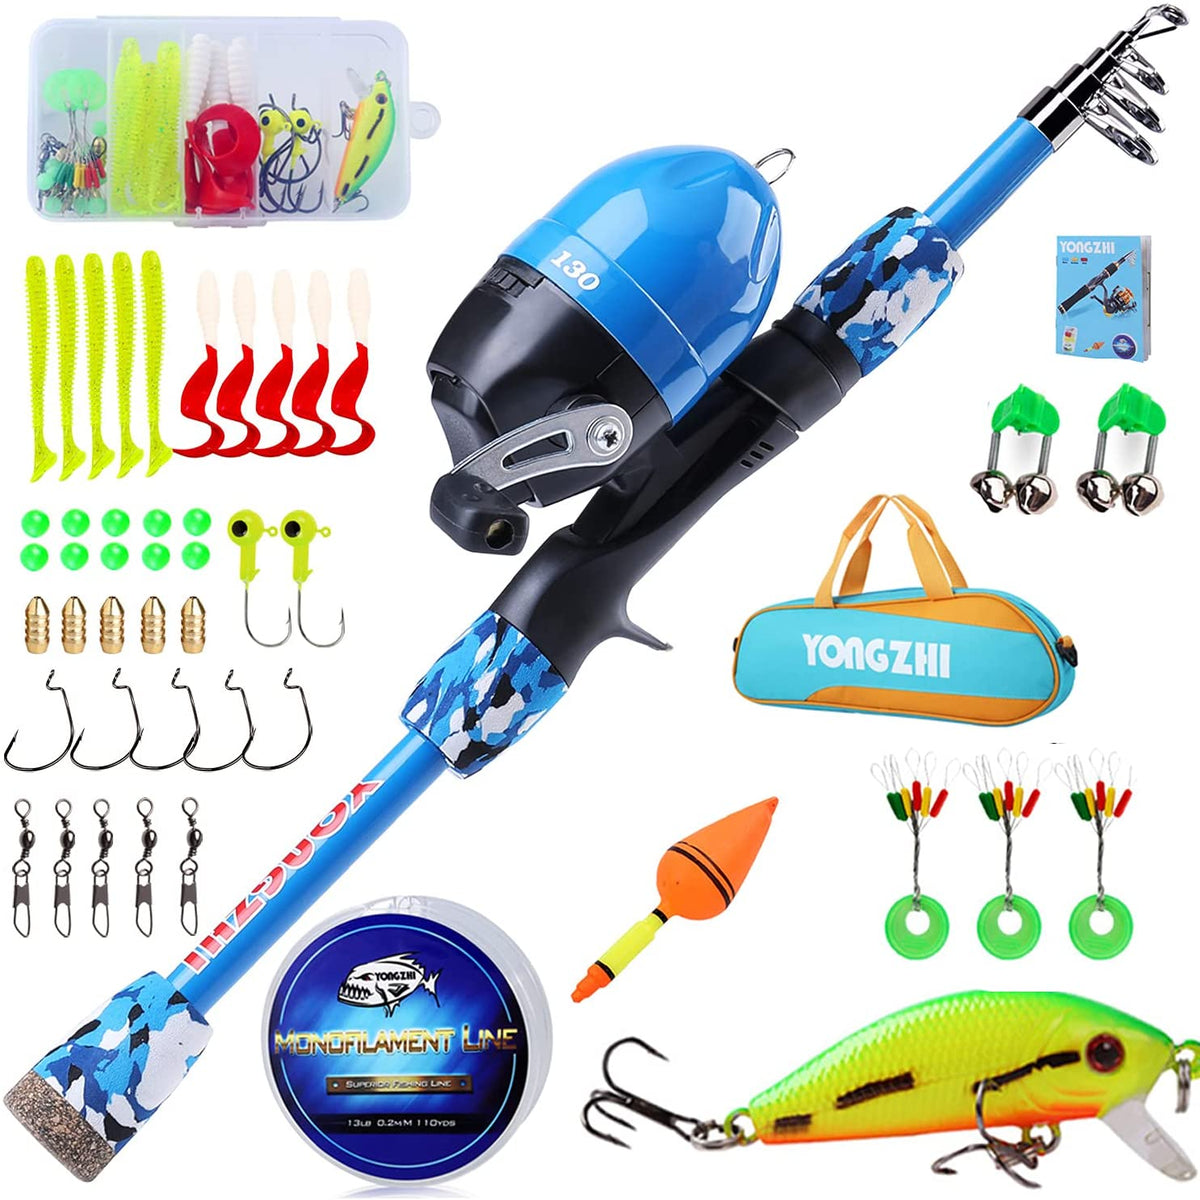 YONGZHI Kids Fishing Ice Fishing Pole, Portable Telescopic Rod and Reel  Combo Kit - with Spincast Fishing Reel Tackle Box for Boys, Girls, Youth